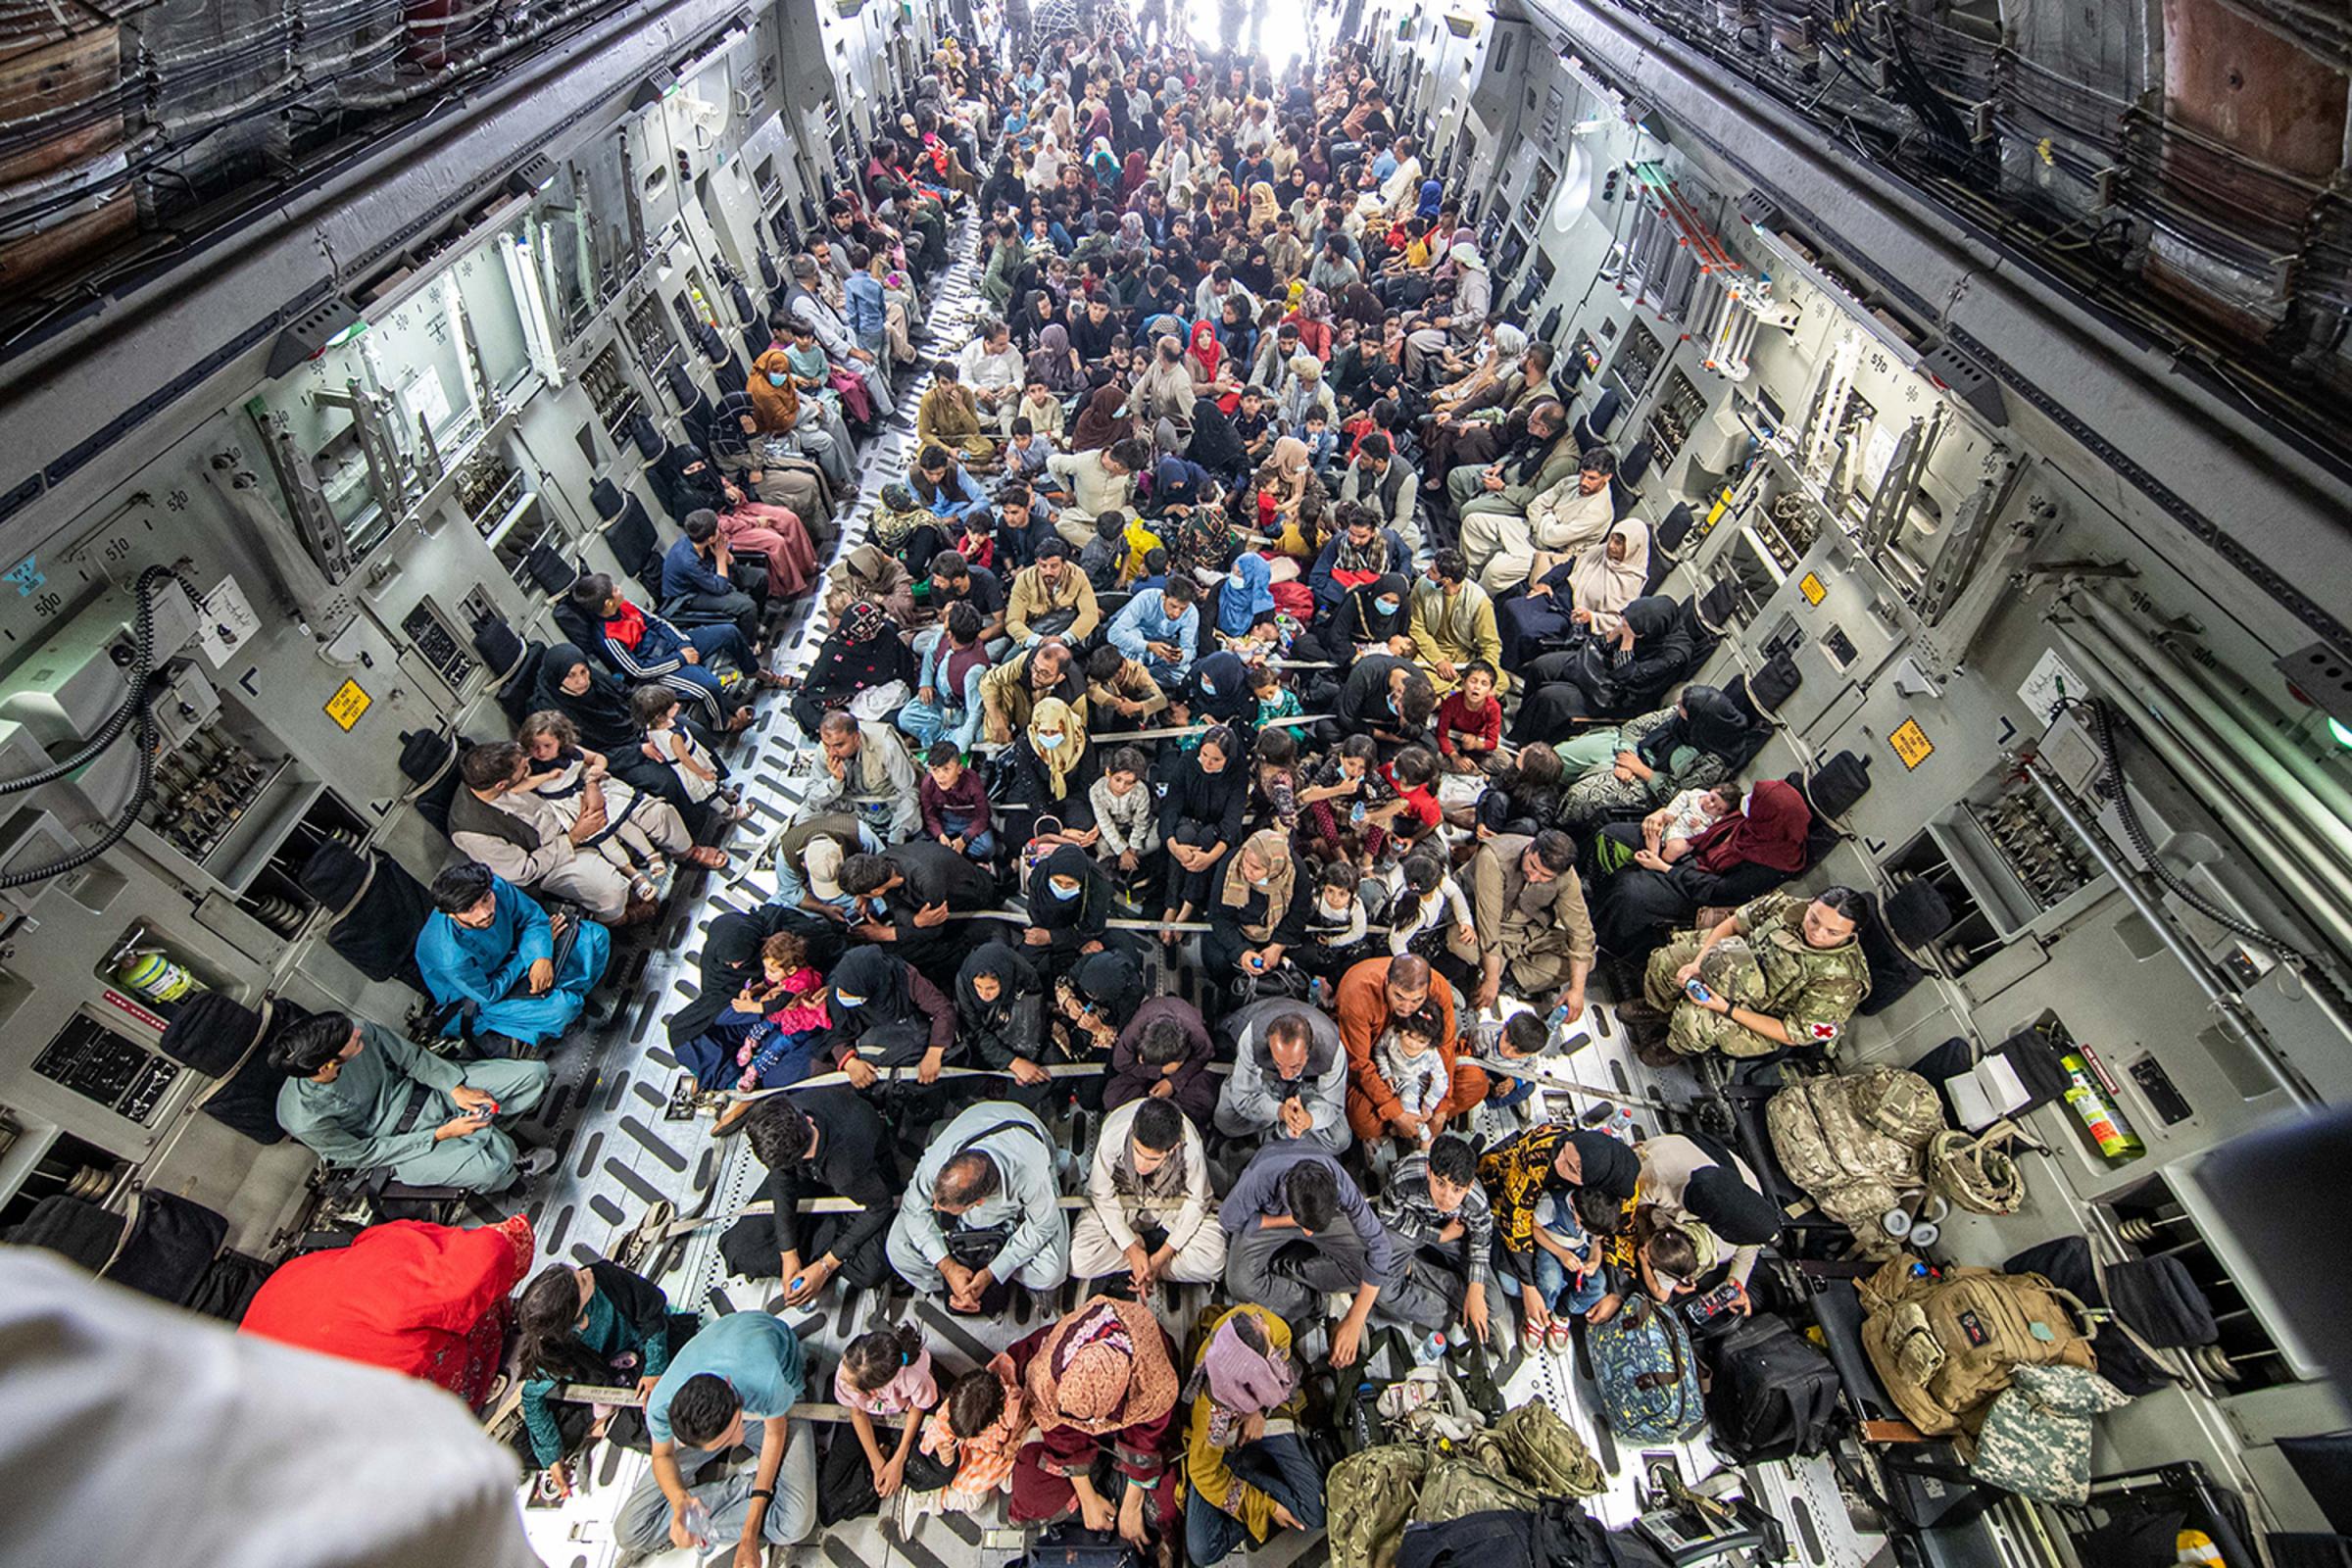 A full flight of 265 people supported by members of the UK Armed Forces on board an evacuation flight out of Kabul airport Picture: PA